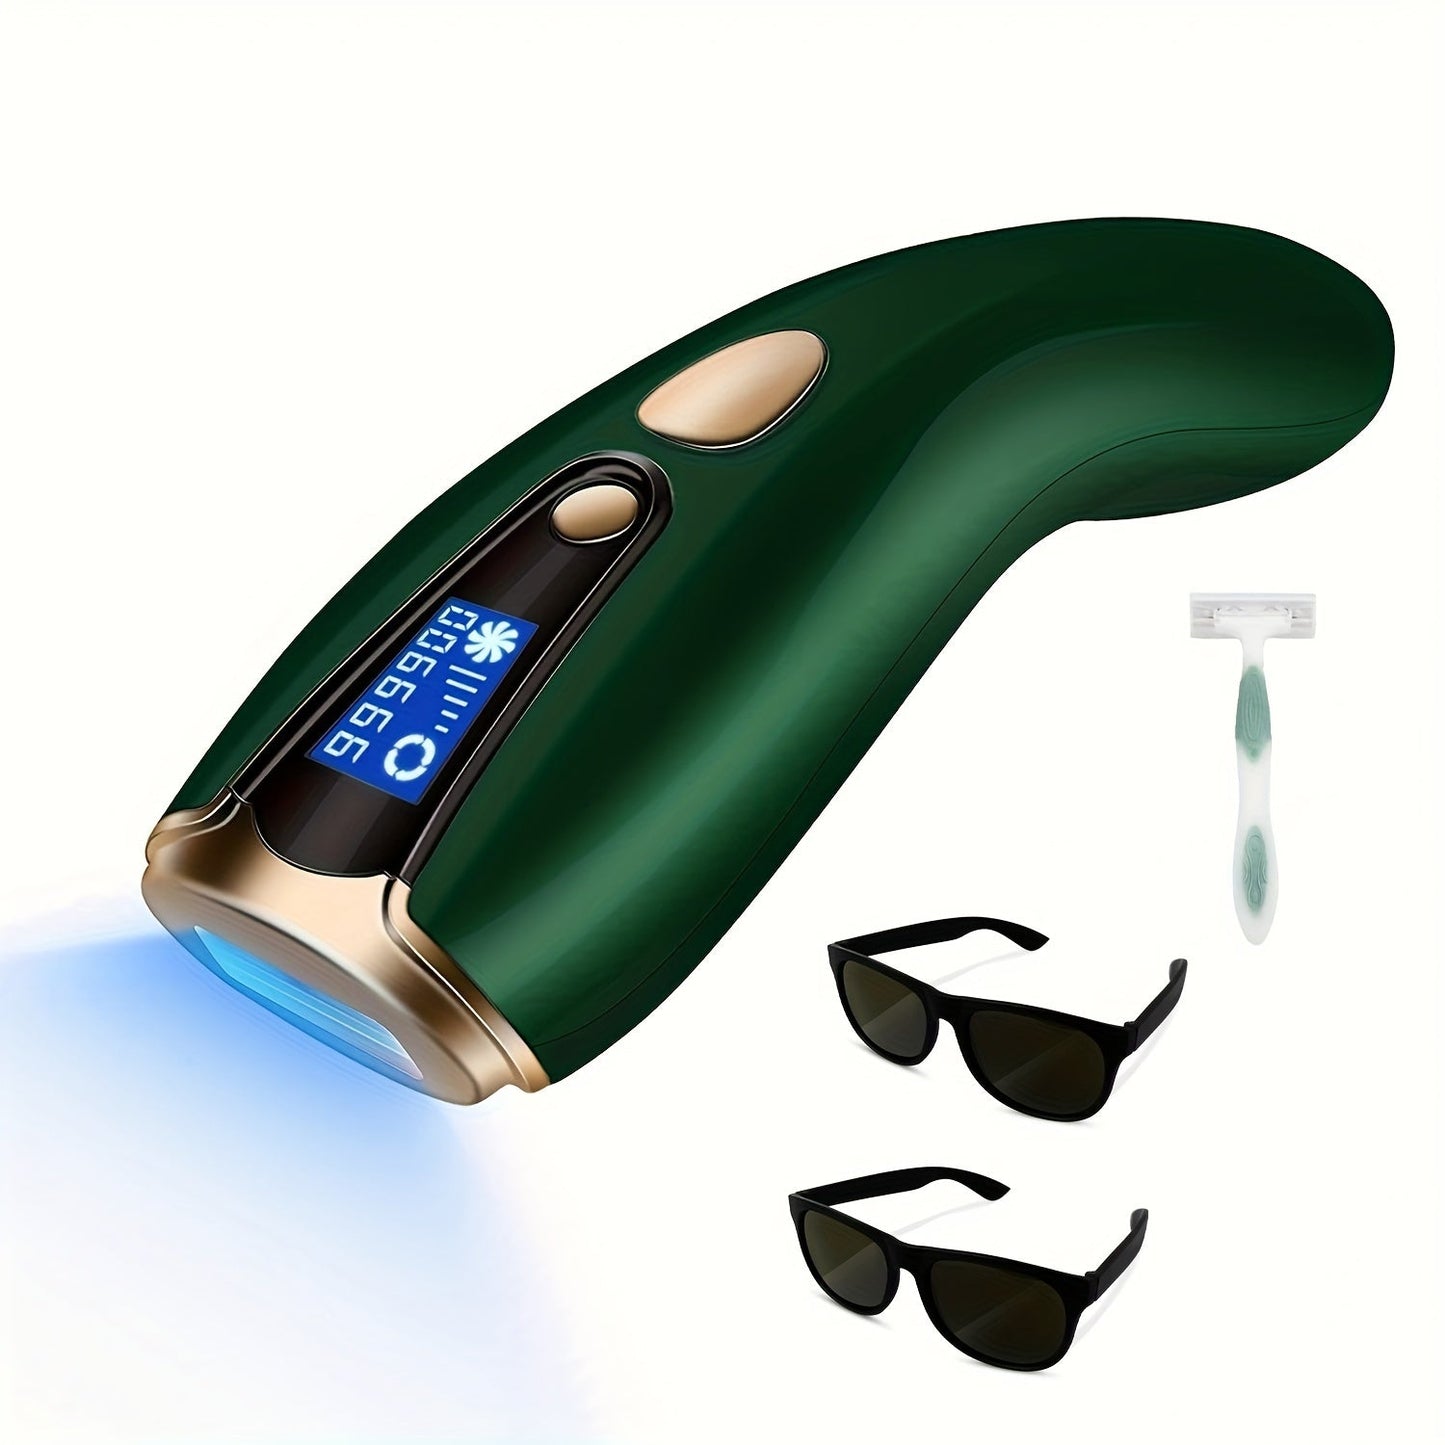 Permanent Painless Hair Removal for Women & Men - Laser IPL Device for Arms, Legs, Bikini & Facial Hair!